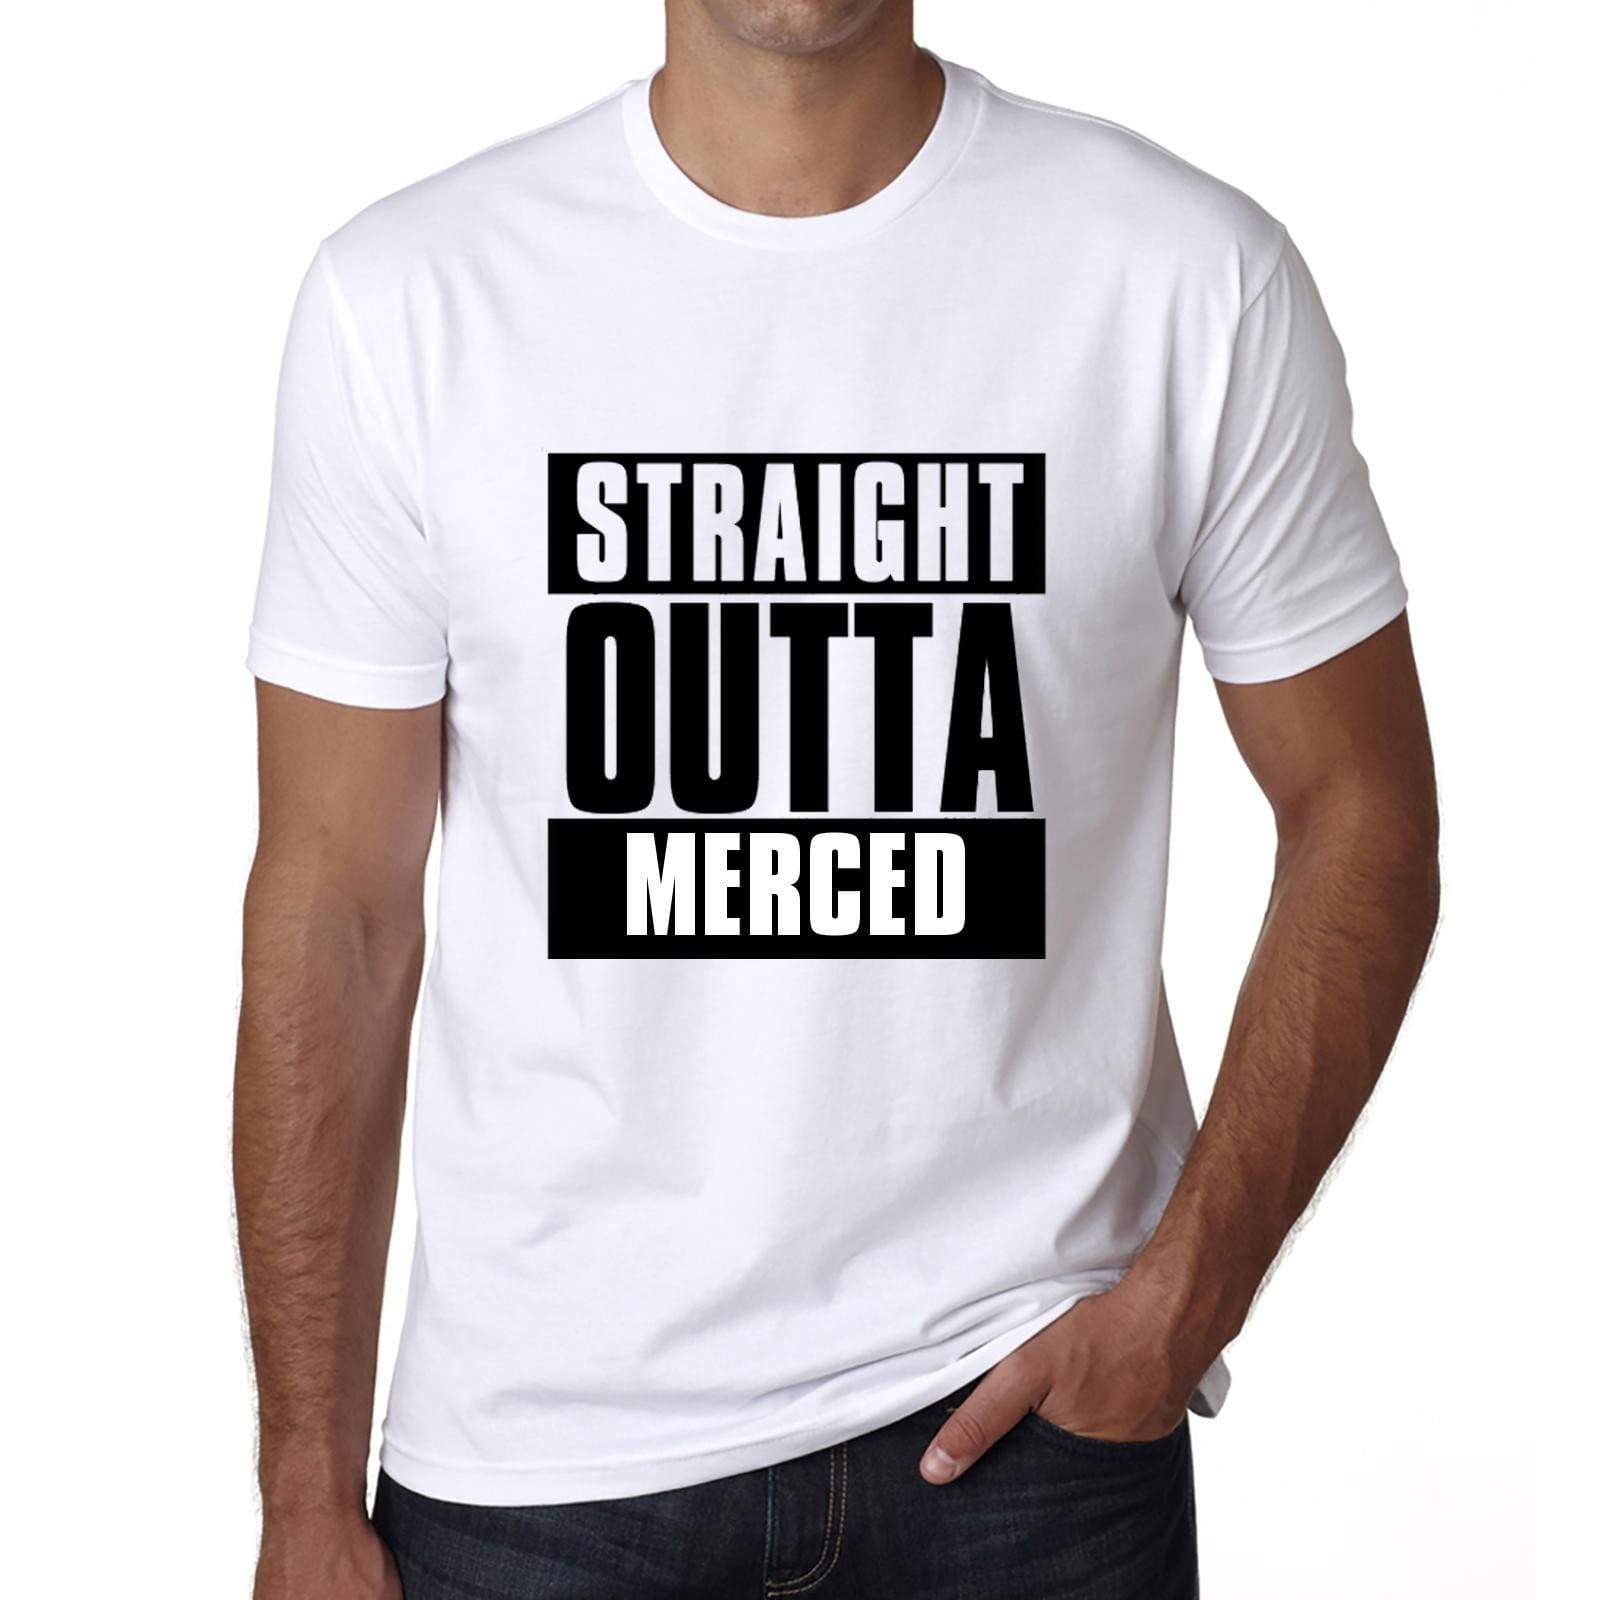 Straight Outta Merced Mens Short Sleeve Round Neck T-Shirt 00027 - White / S - Casual